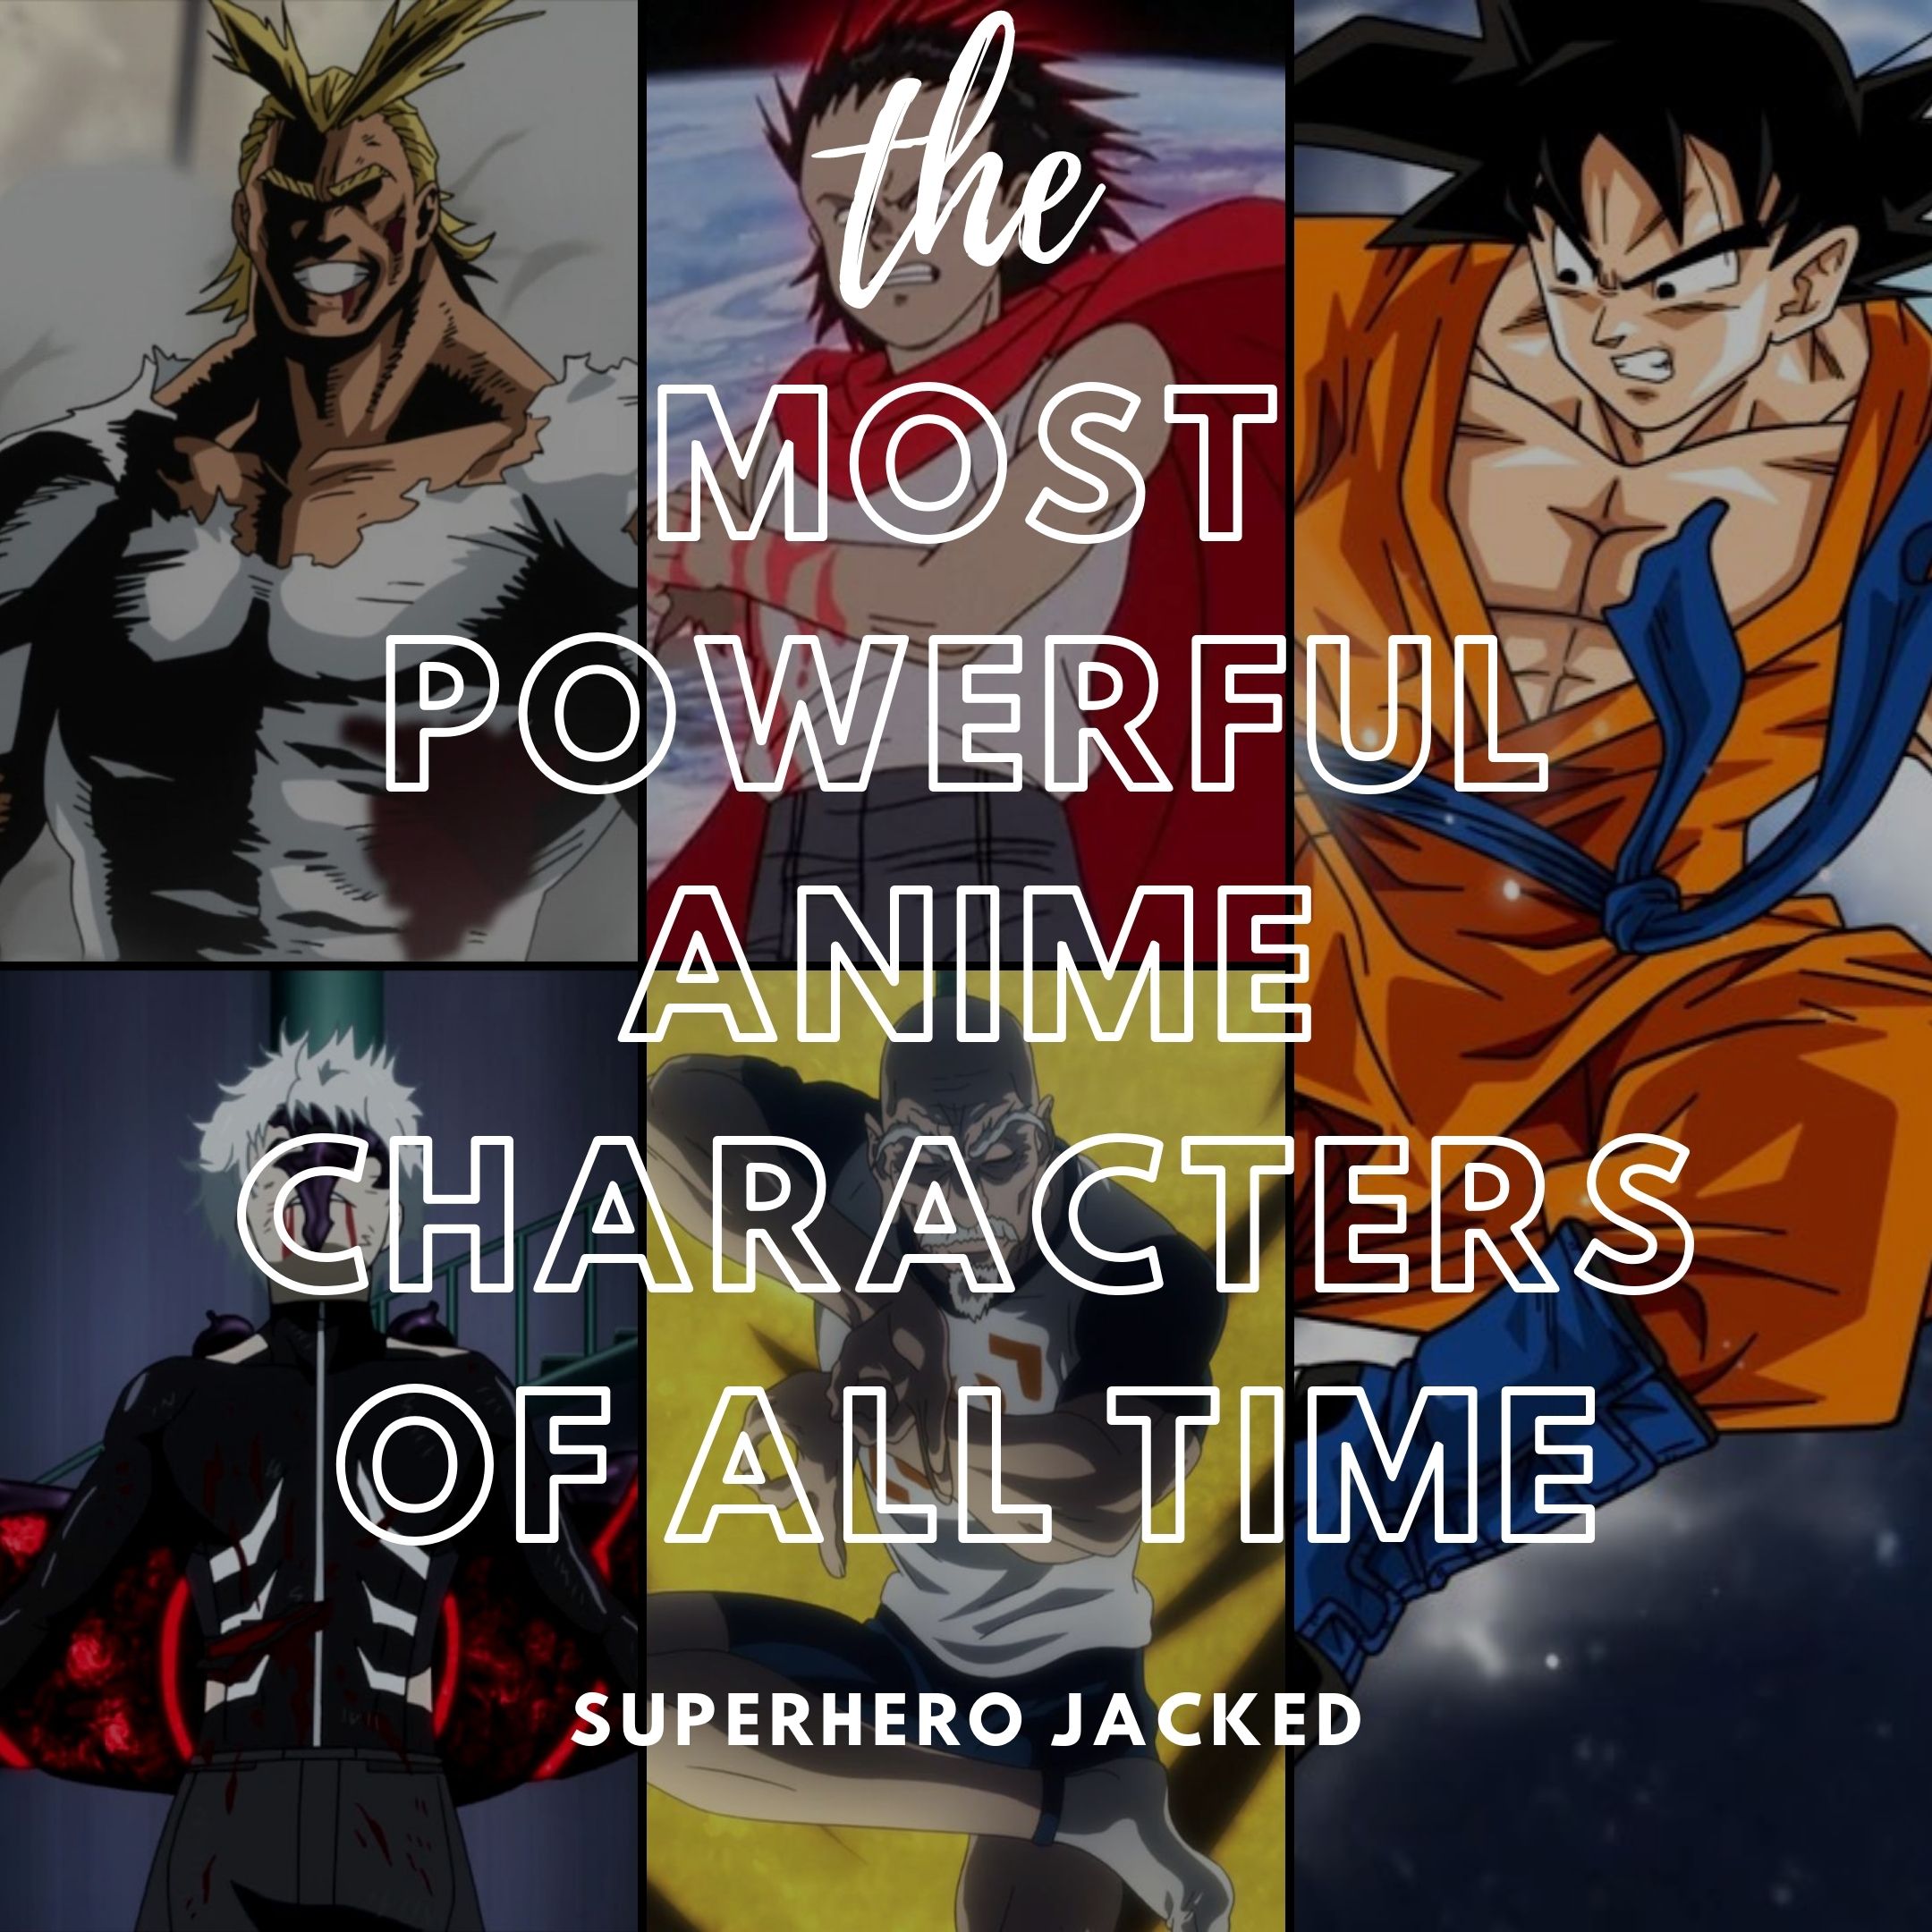 Daily Dose Of Anime | Top 10 Strongest Characters In Thier Own Series  According To Japanese Fans! A Japanese website Anime! Anime! asked it's  user to rank the... | Instagram